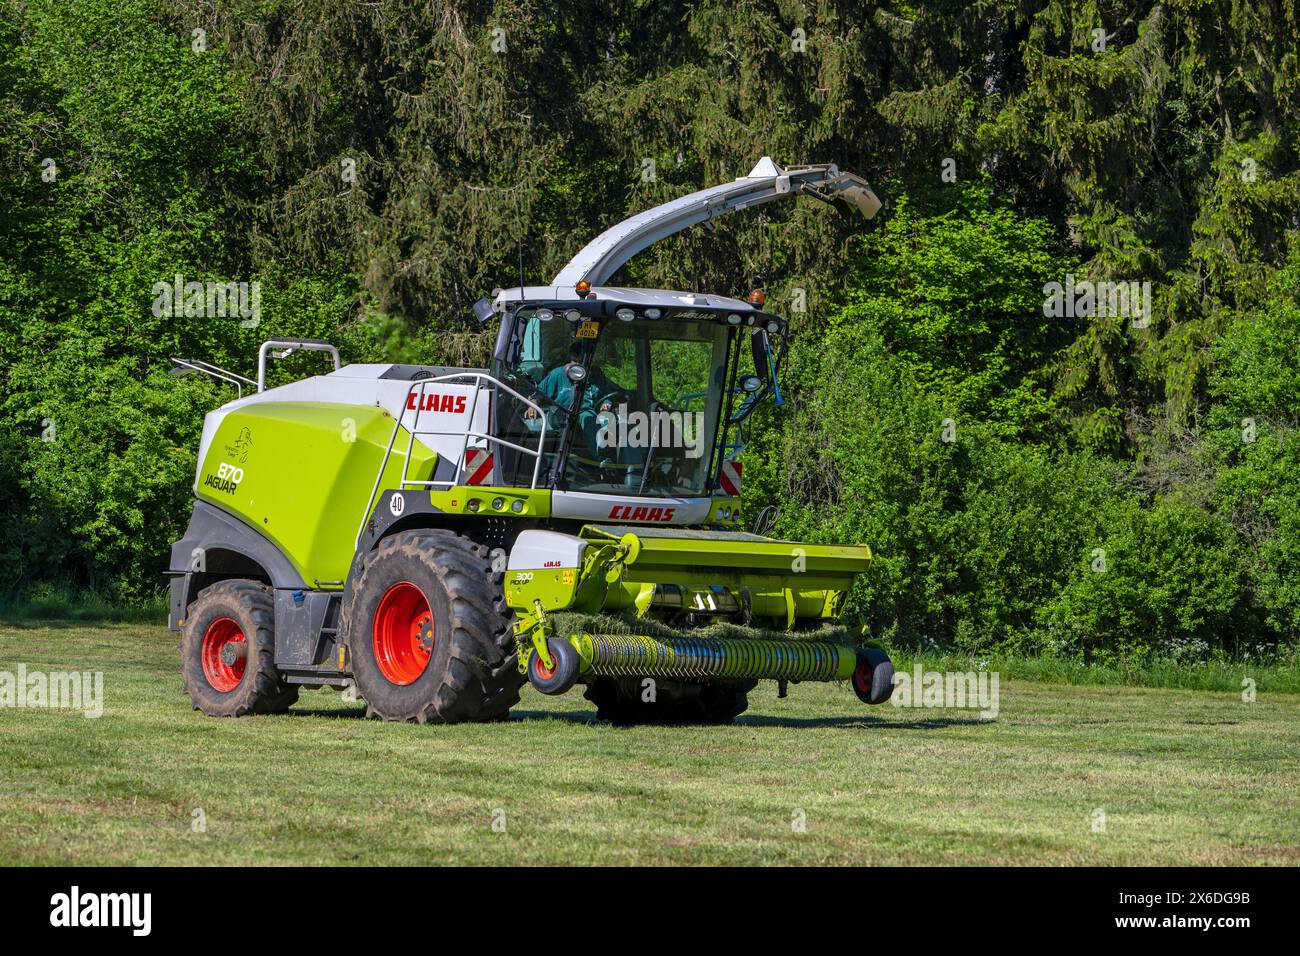 Claas Jaguar 870 forage harvester / self-propelled silage chopper harvesting grass from meadow / pasture Stock Photo